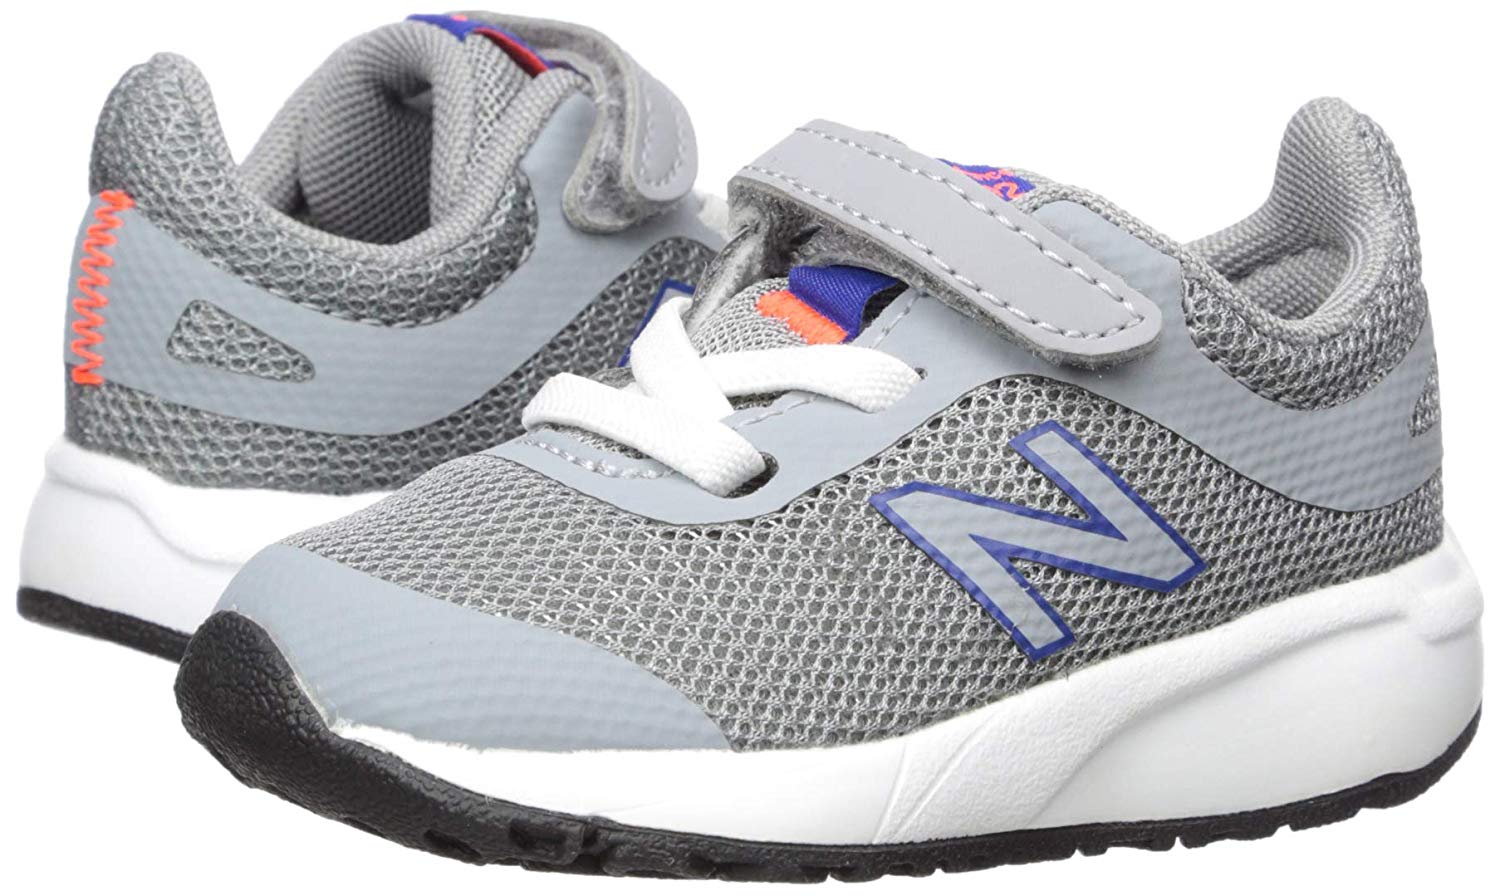 New Balance 455v2 Unisex Kids Sneakers Shoes